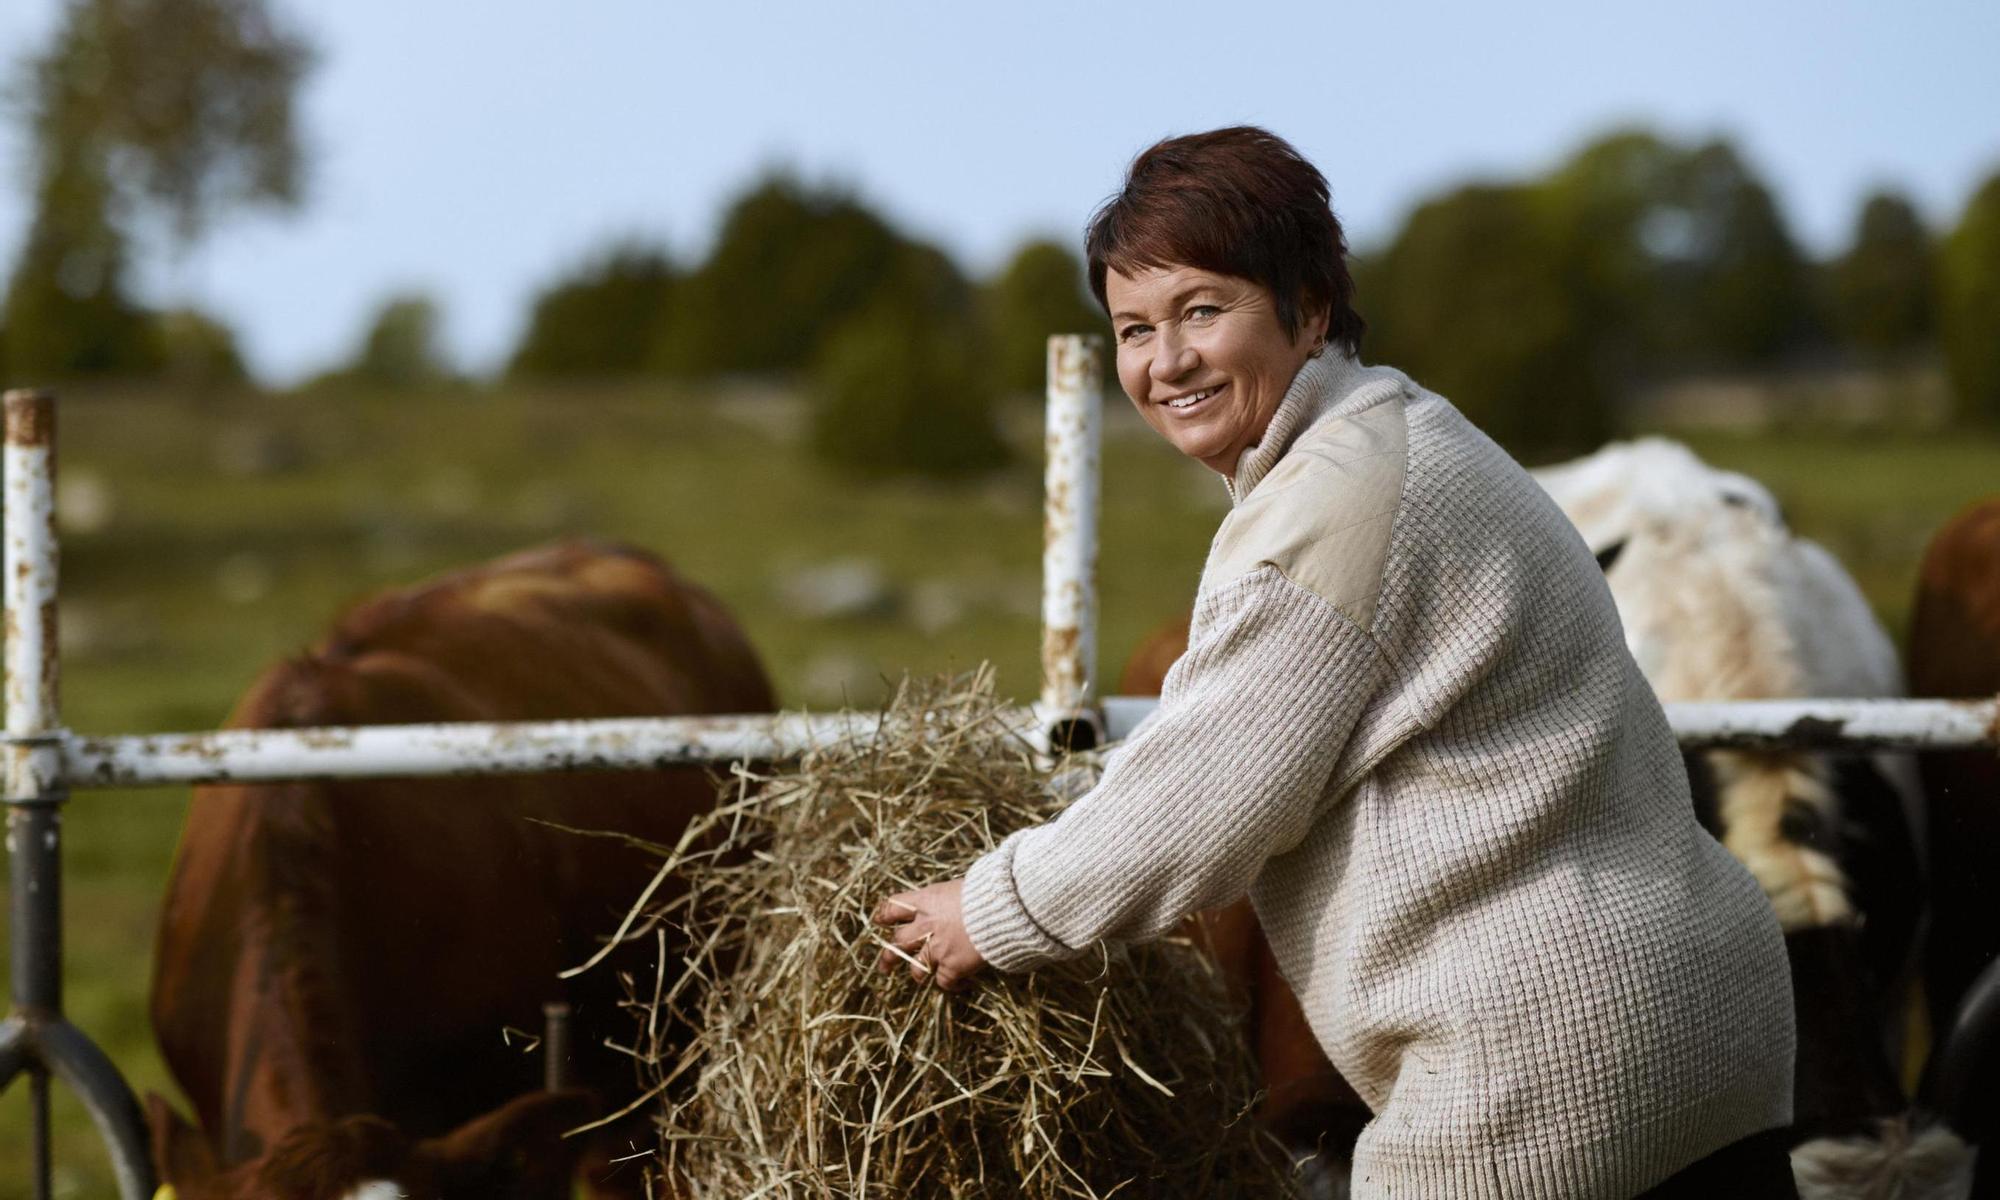 Smiling woman giving hay to cows